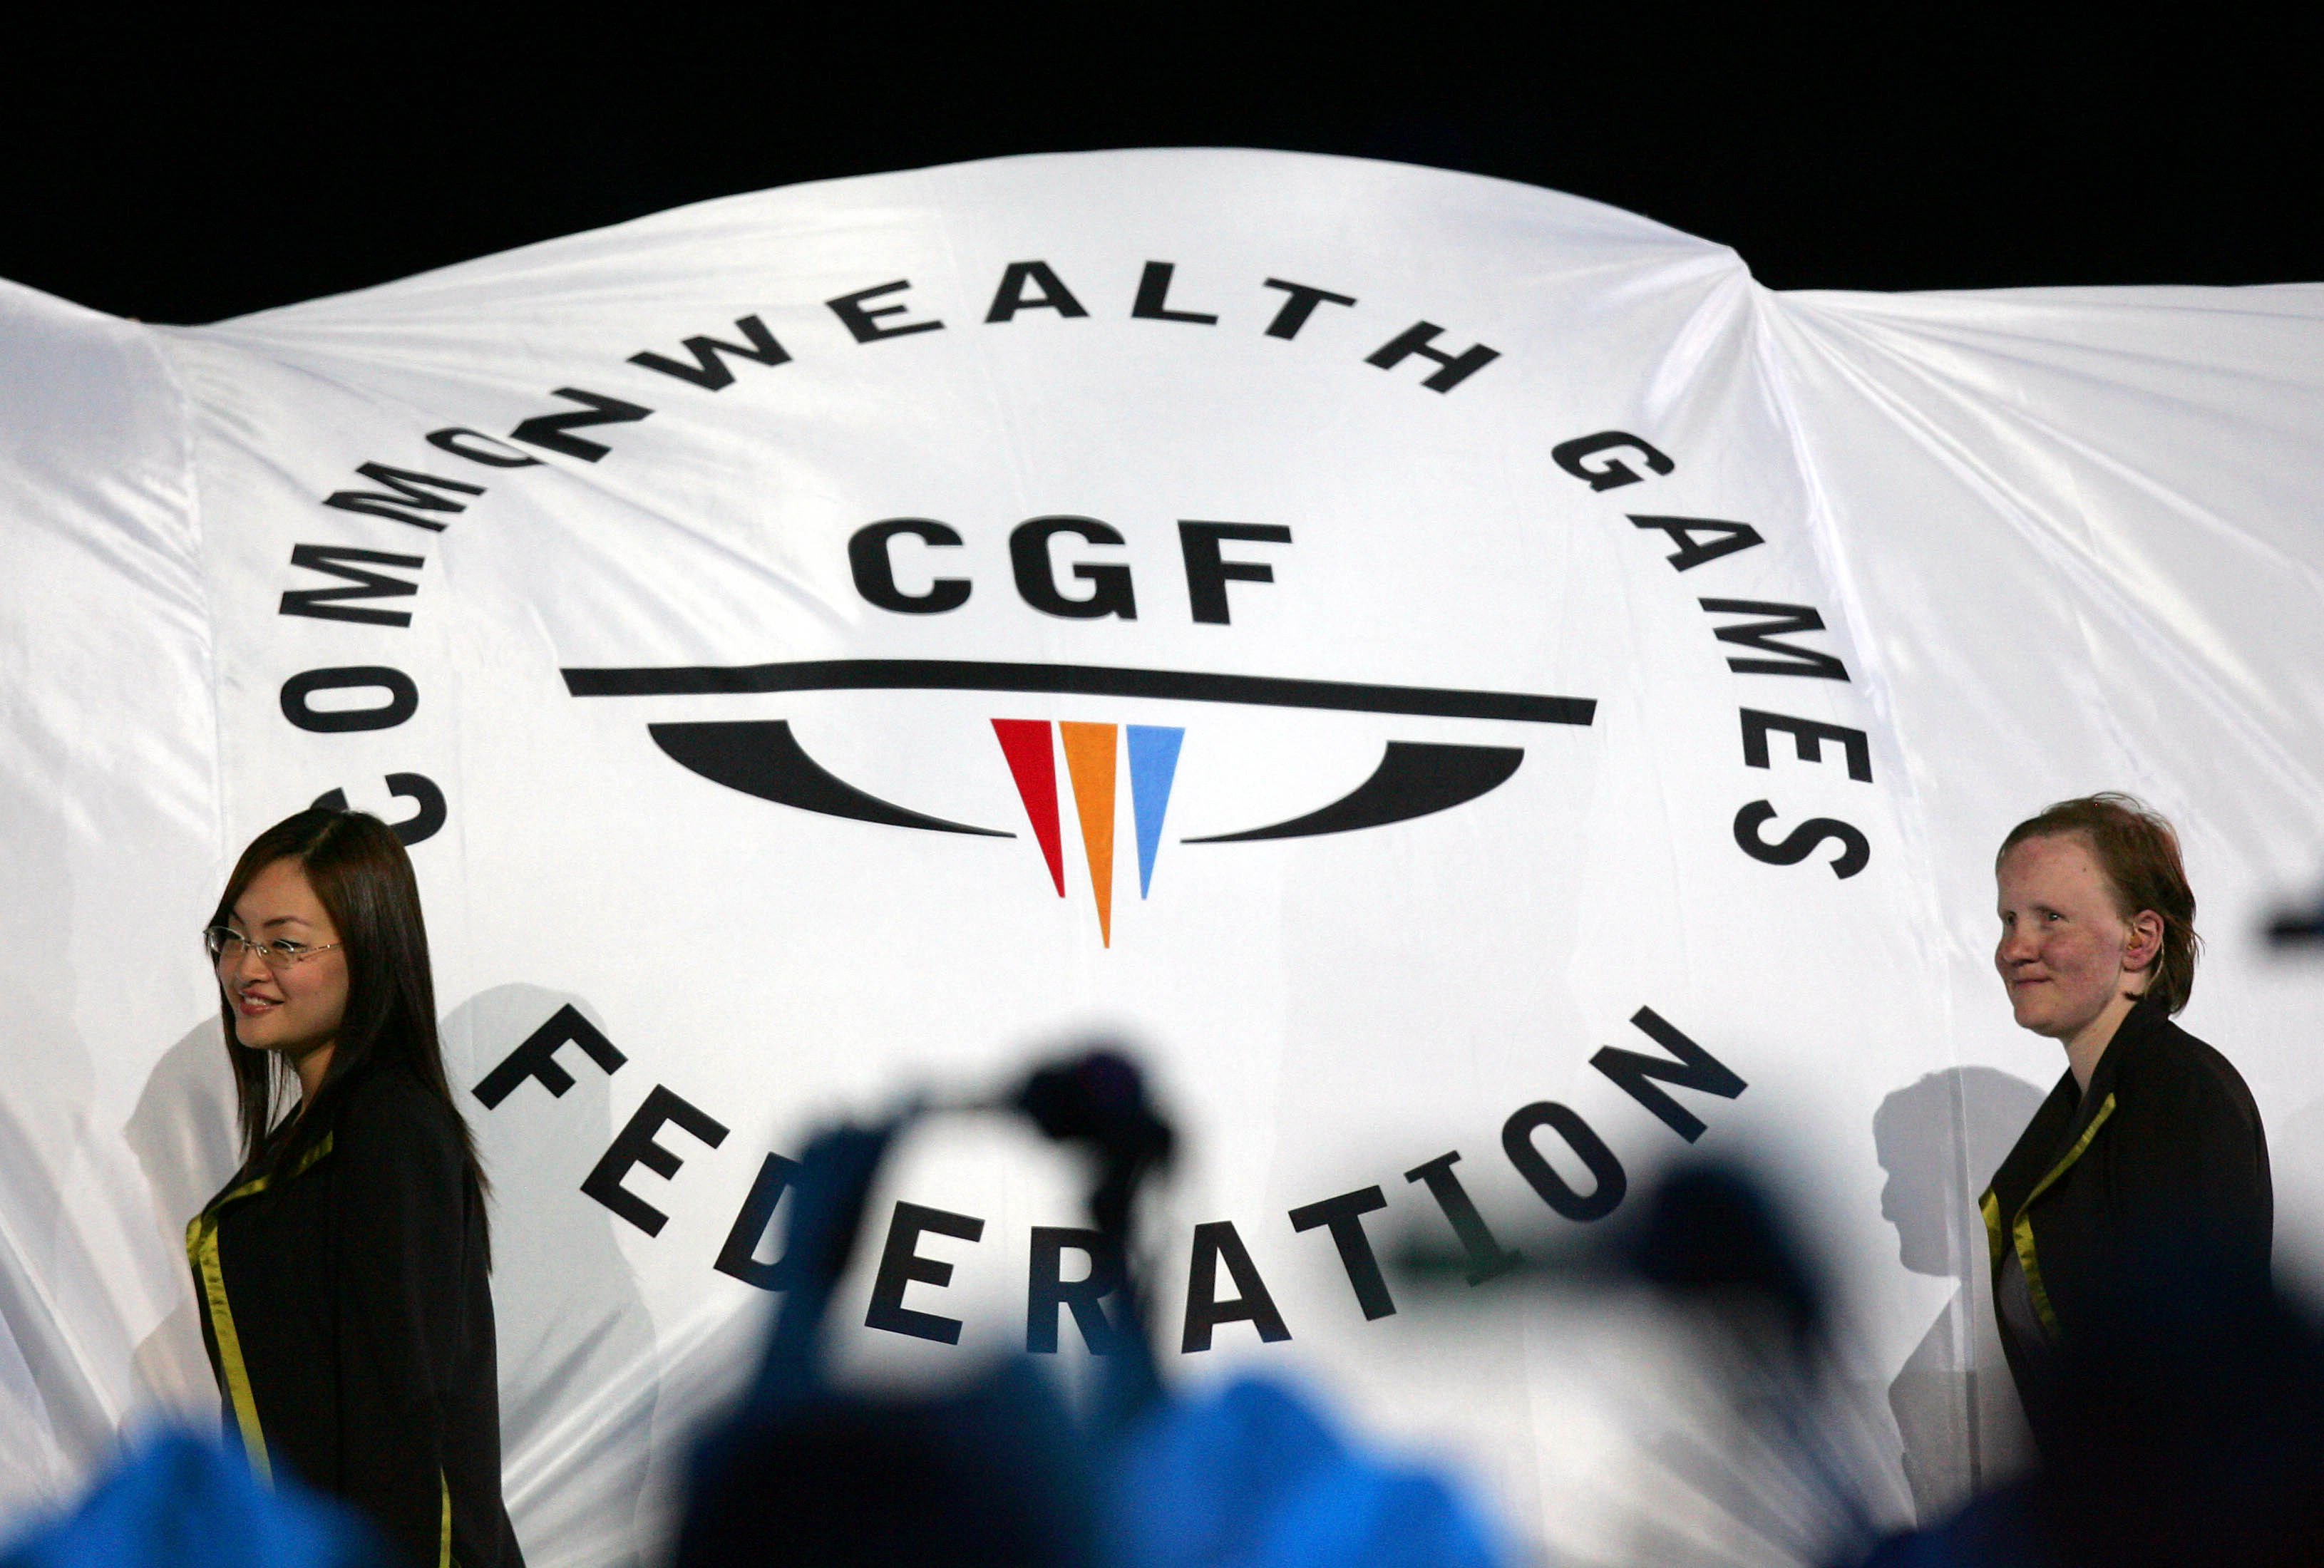 The Commonwealth Games Federation flag is carried into the arena during the Commonwealth Games opening ceremony in Melbourne, Australia on March 15, 2006. Photo: AP